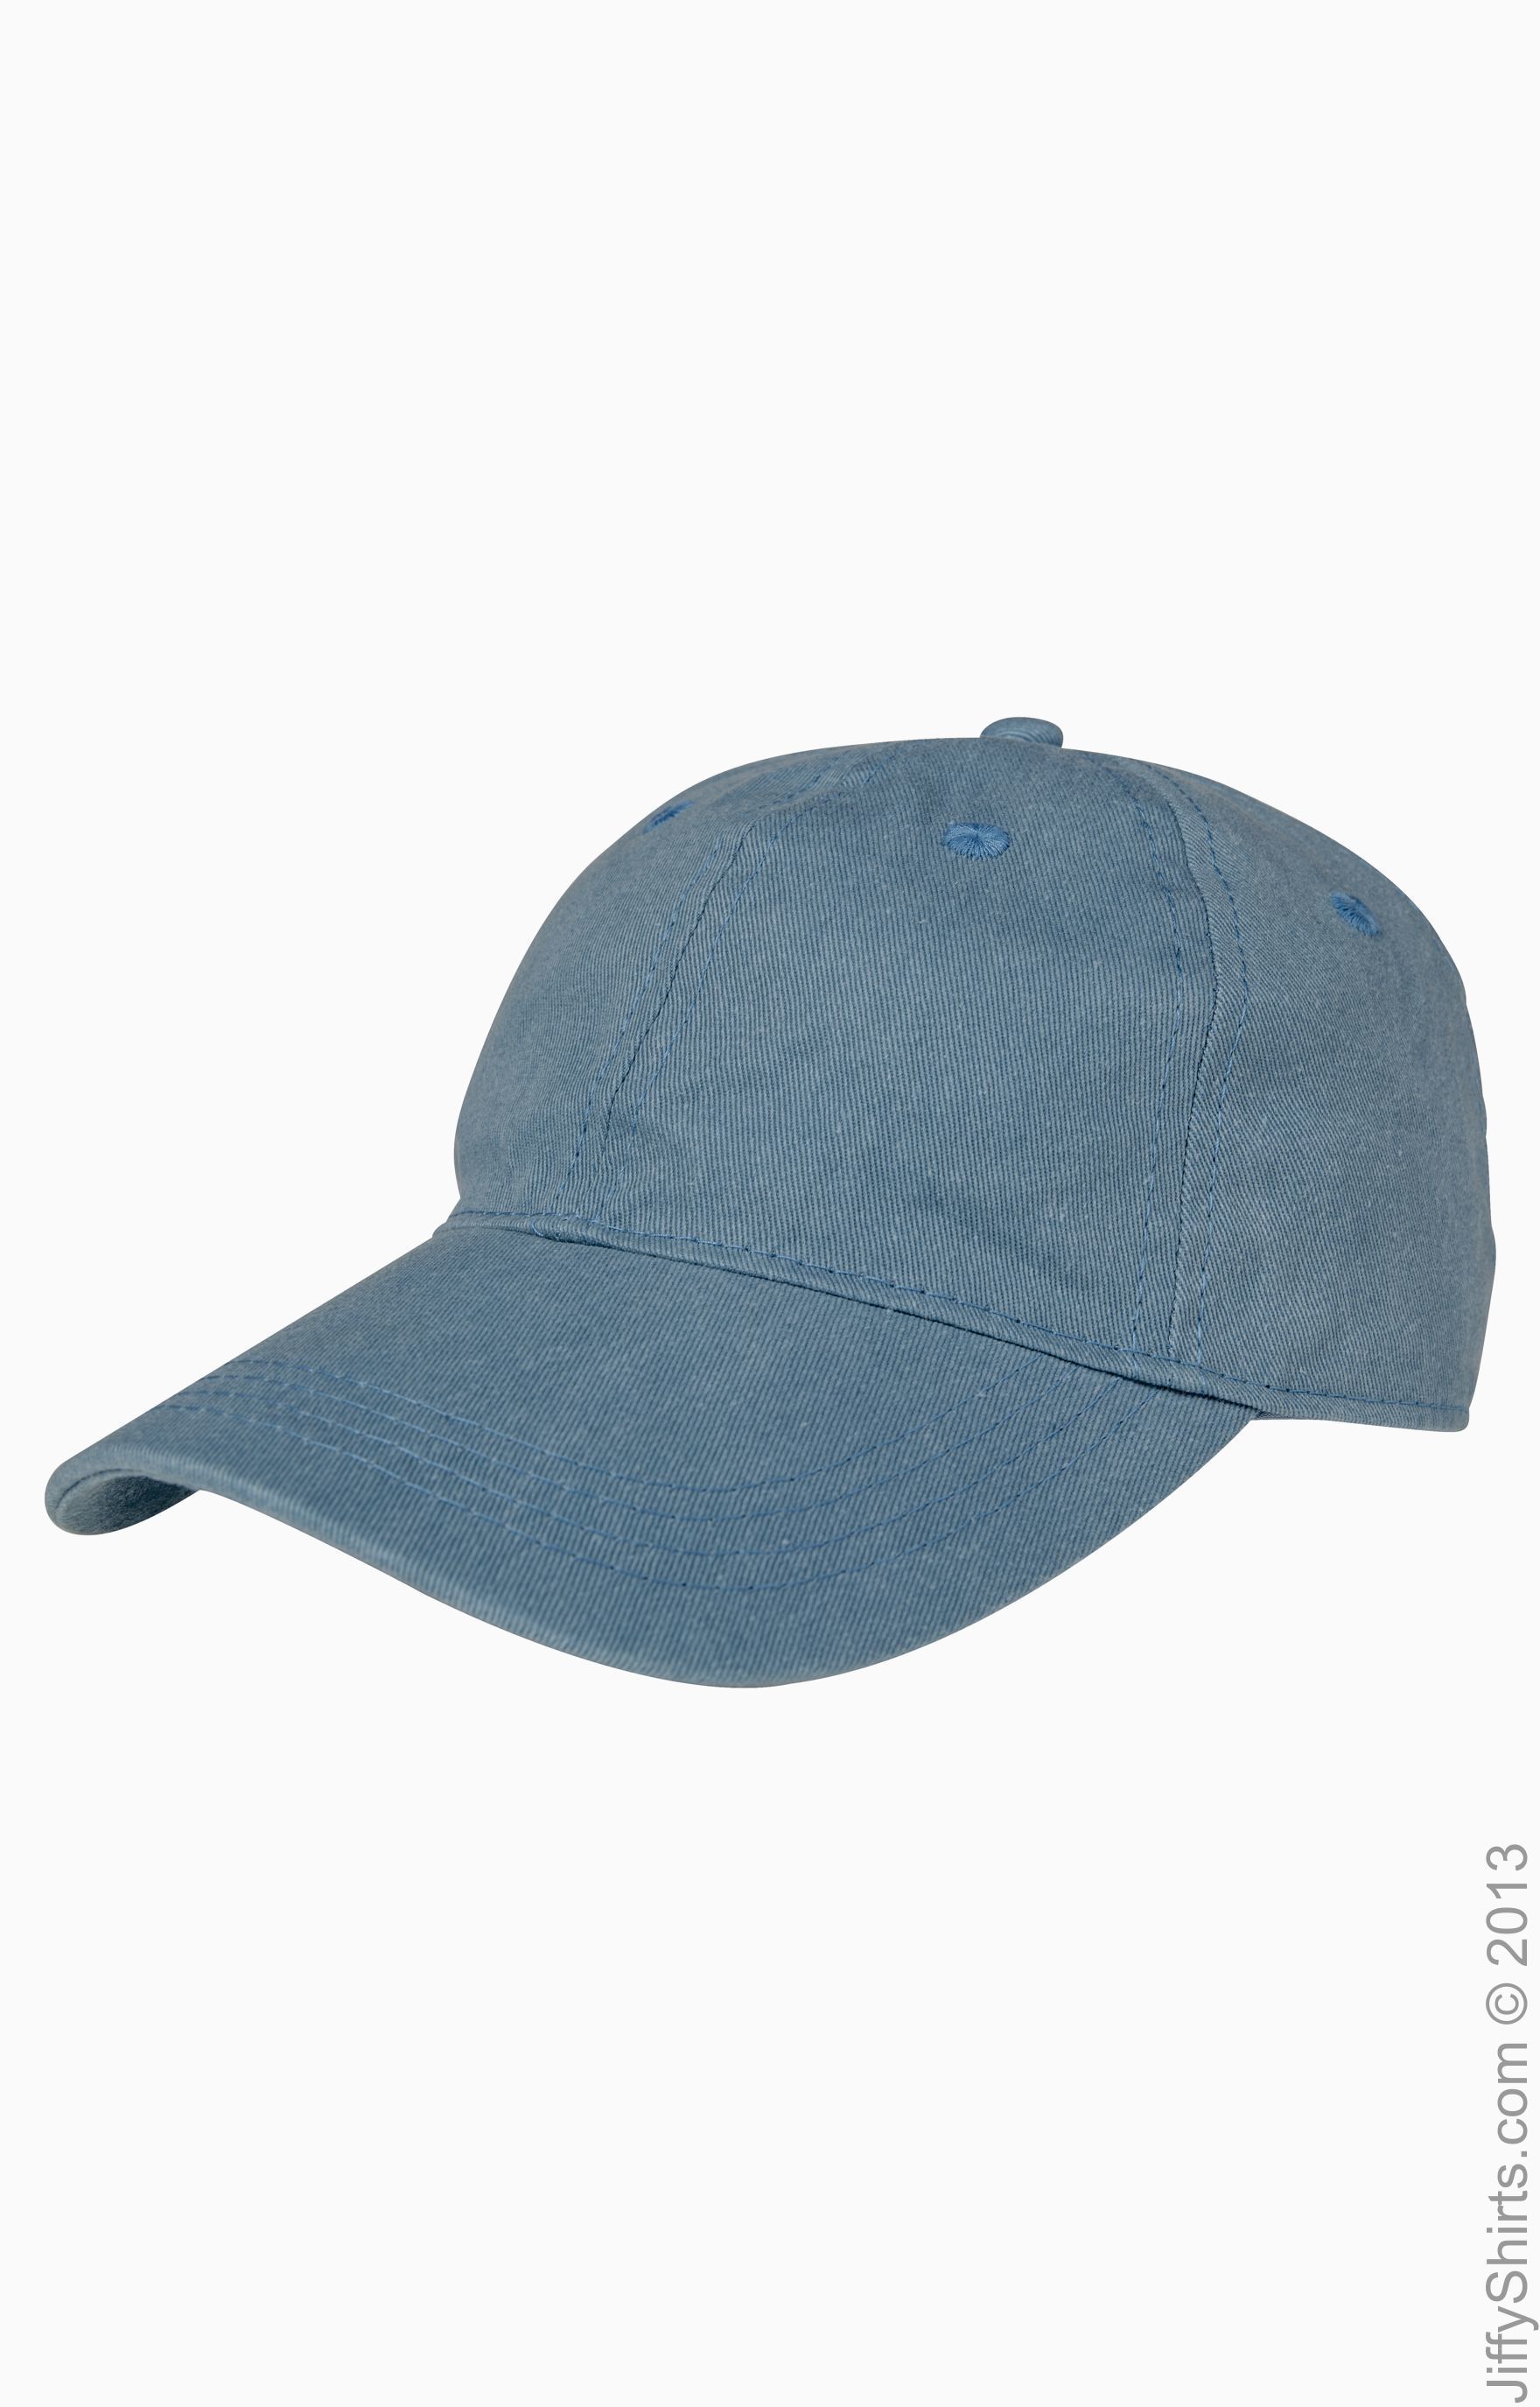 Authentic Pigment 1910 Pigment Dyed Baseball Cap | Jiffy Shirts